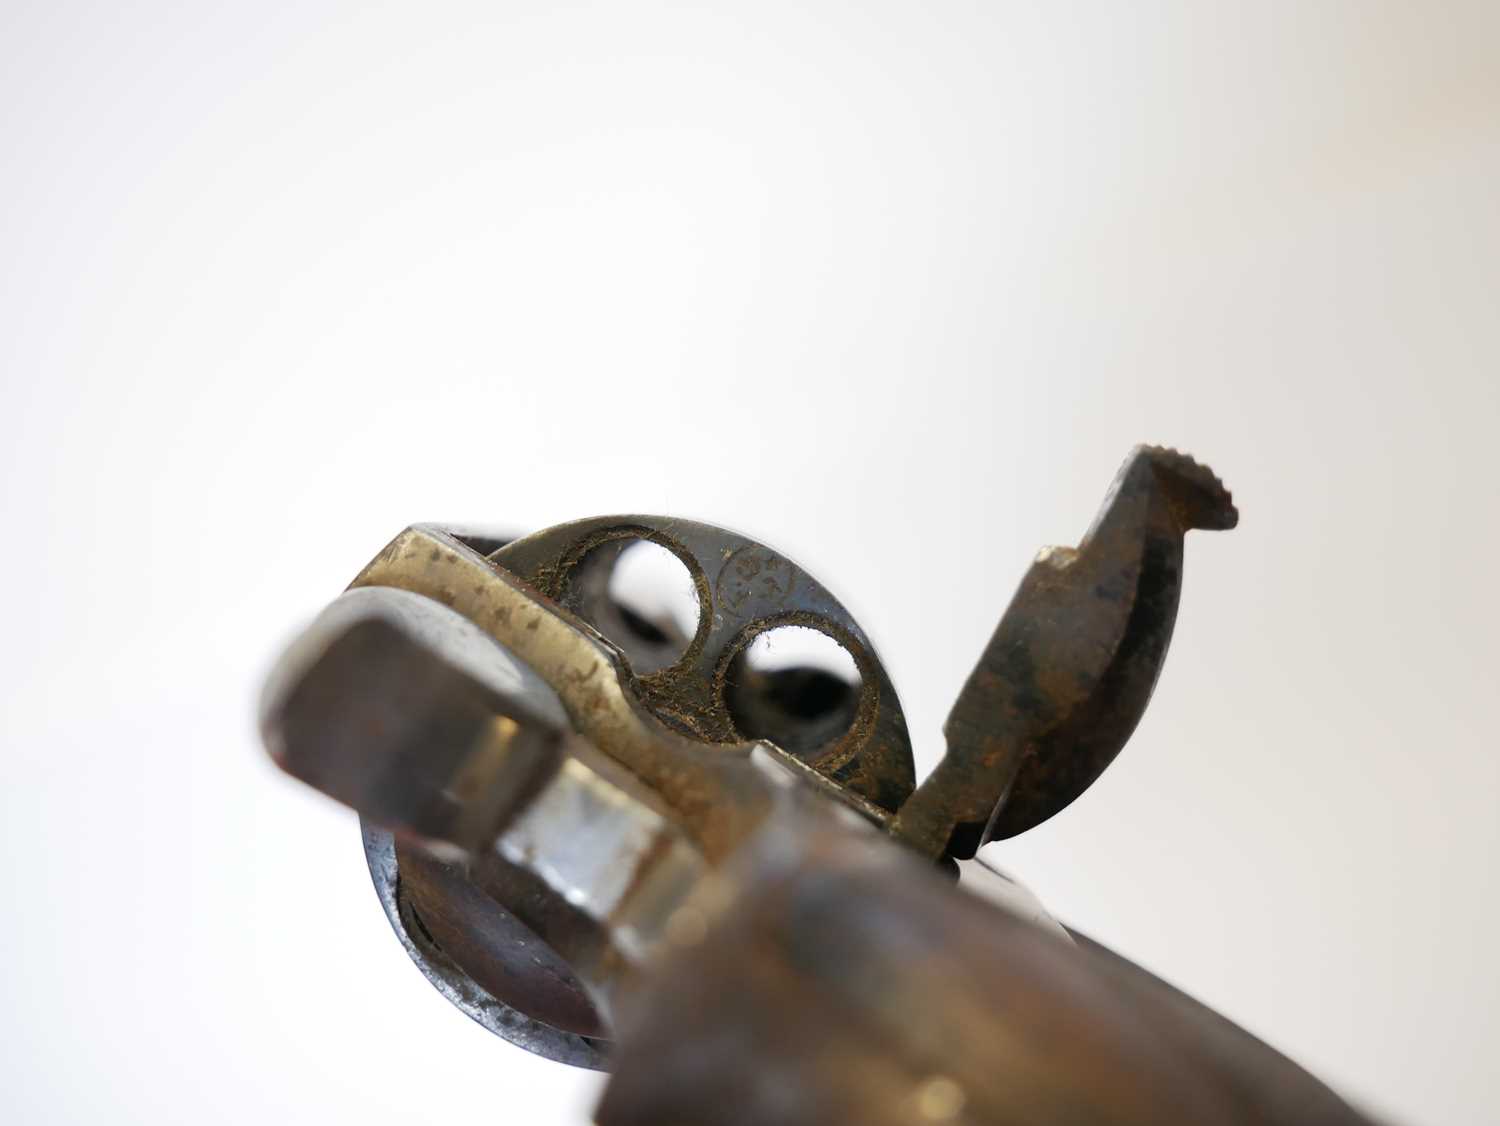 Belgian 7.5mm revolver, no serial number, 2.5 inch sighted barrel, chequered wood grips the grip - Image 7 of 7